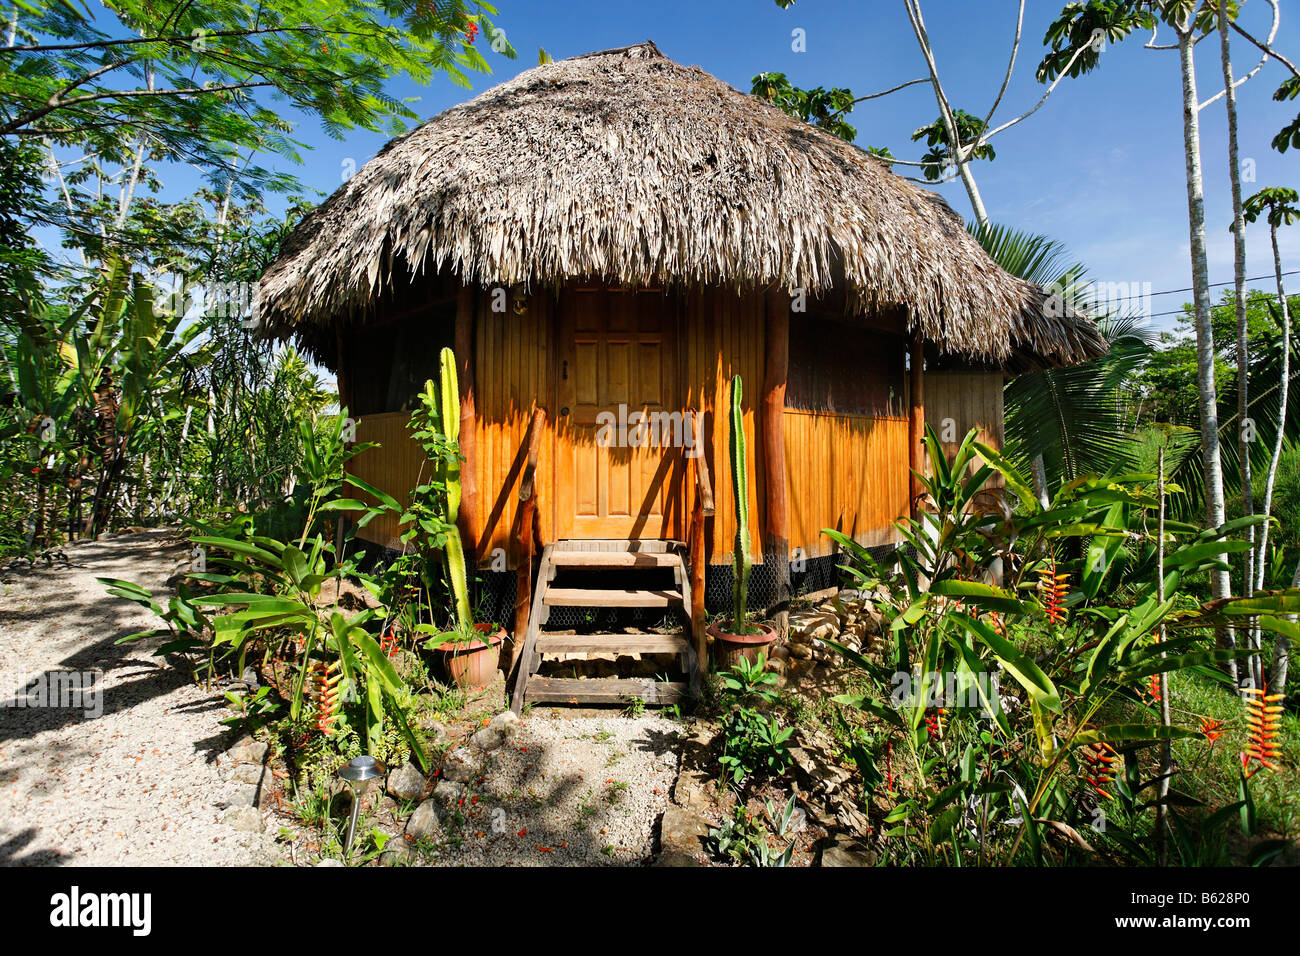 Bungalow with a thatched roof in the tropical forest, Punta Gorda, Belize, Central America, Caribbean Stock Photo